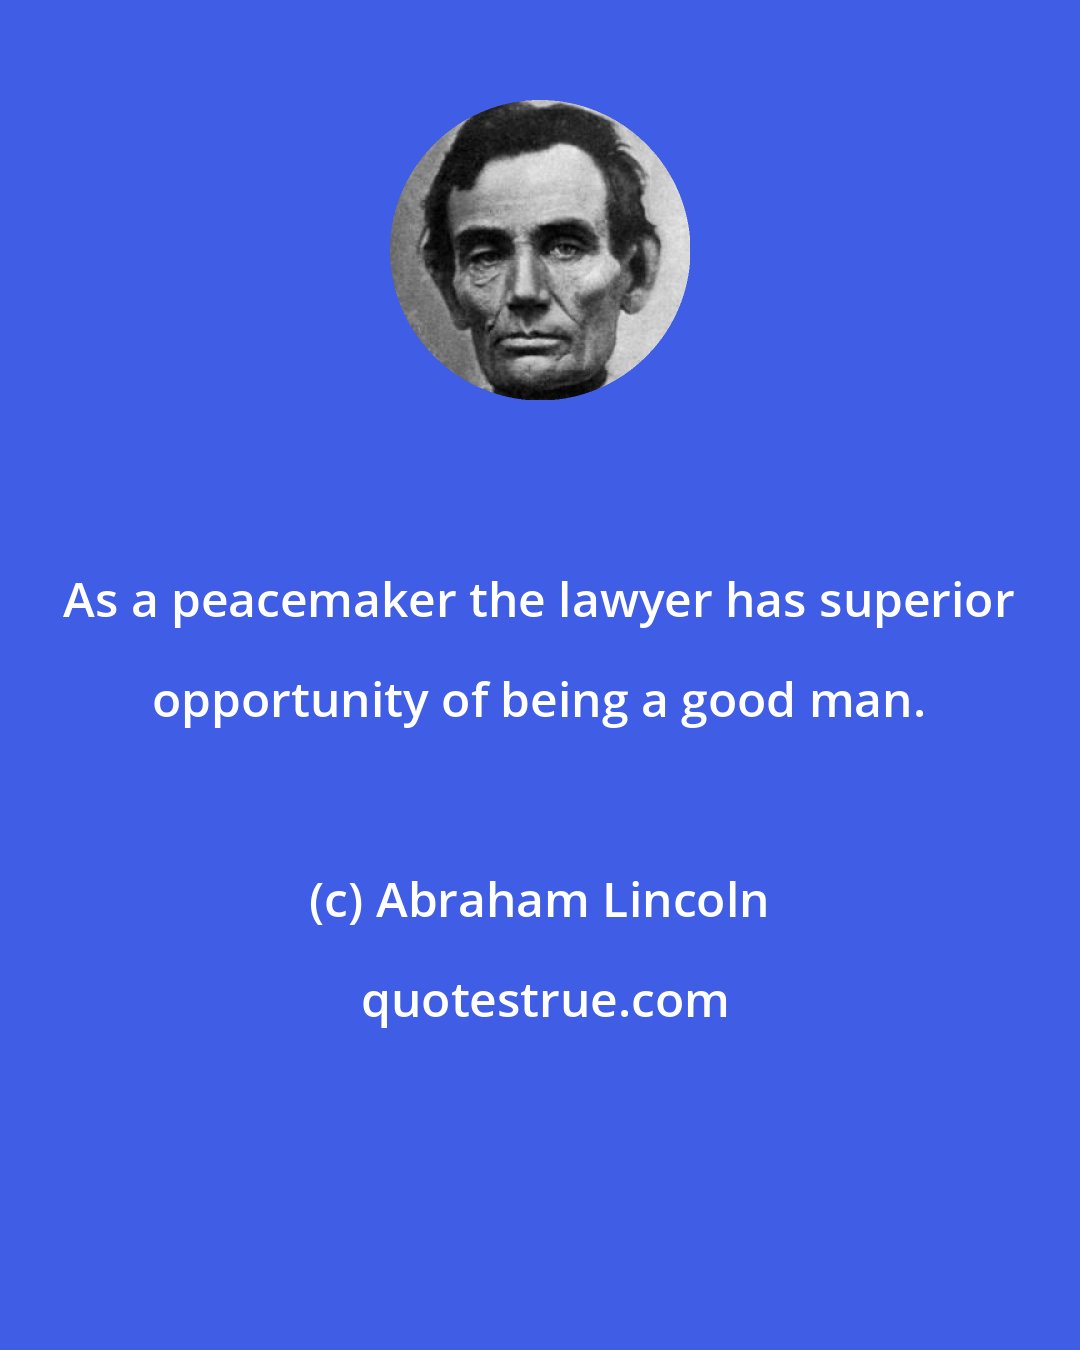 Abraham Lincoln: As a peacemaker the lawyer has superior opportunity of being a good man.